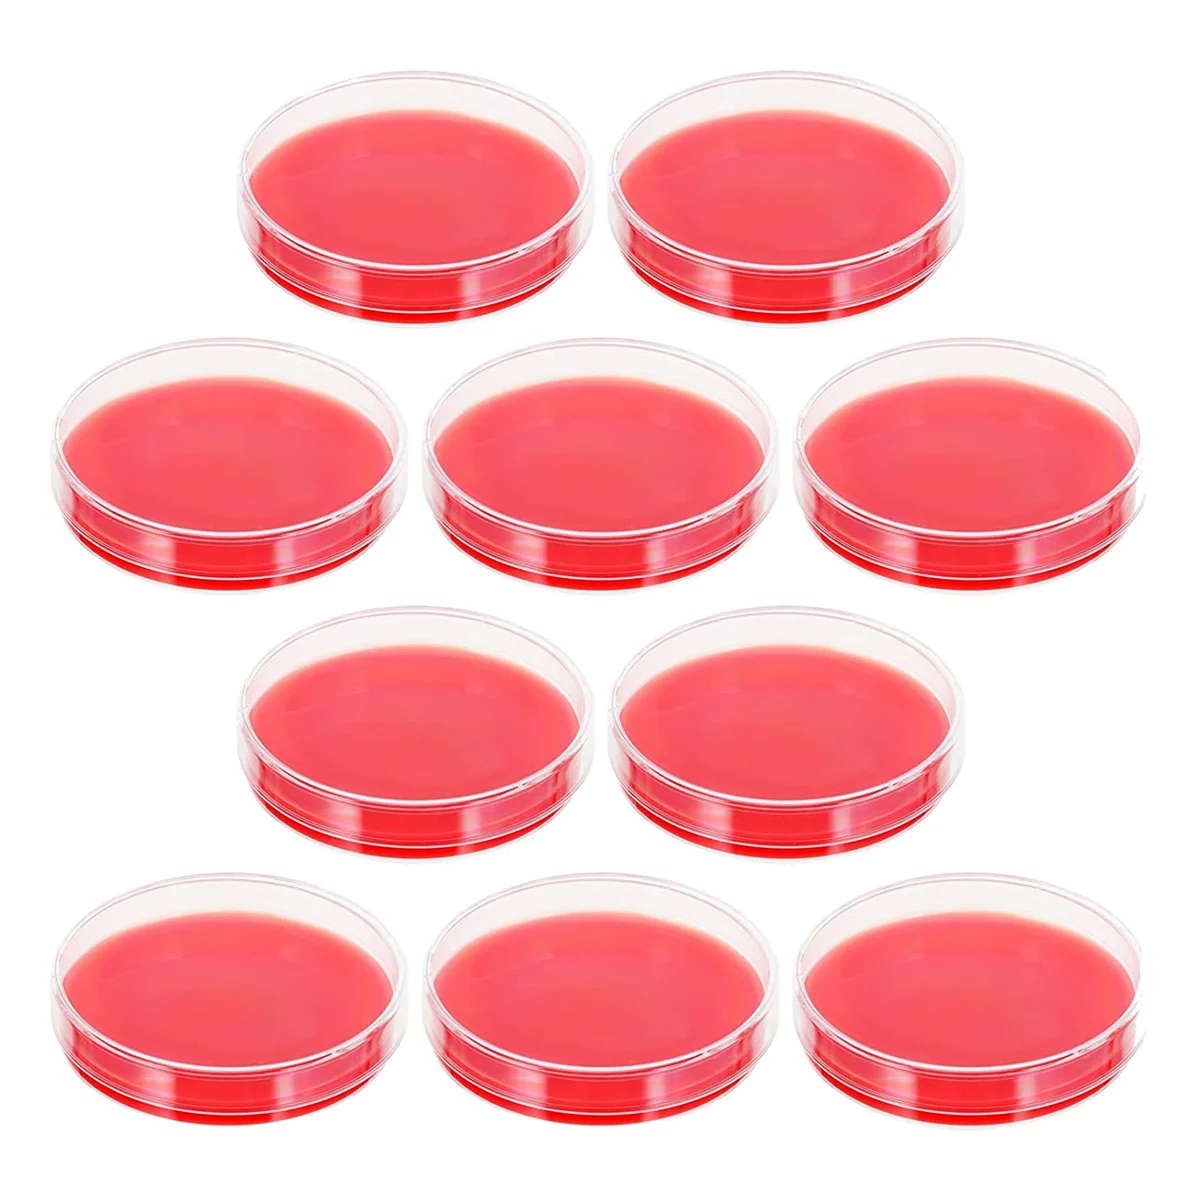 

10Pcs Agar Plates Blood Agar Petri Dishes for Biological Laboratory Equipment School Science Projects